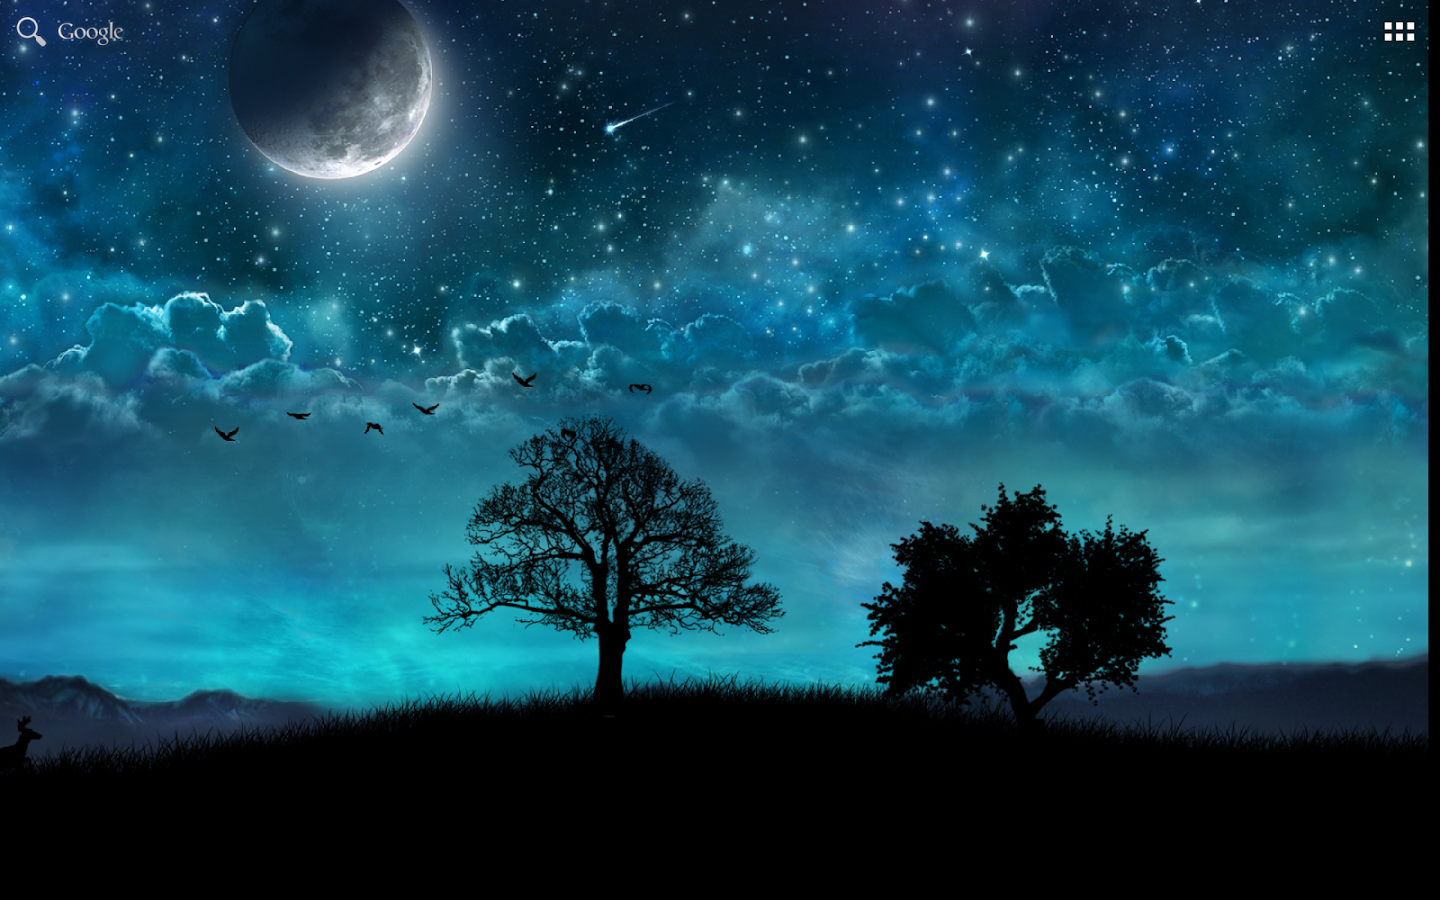 this live wallpaper features a relaxing night scene with dreamy blue